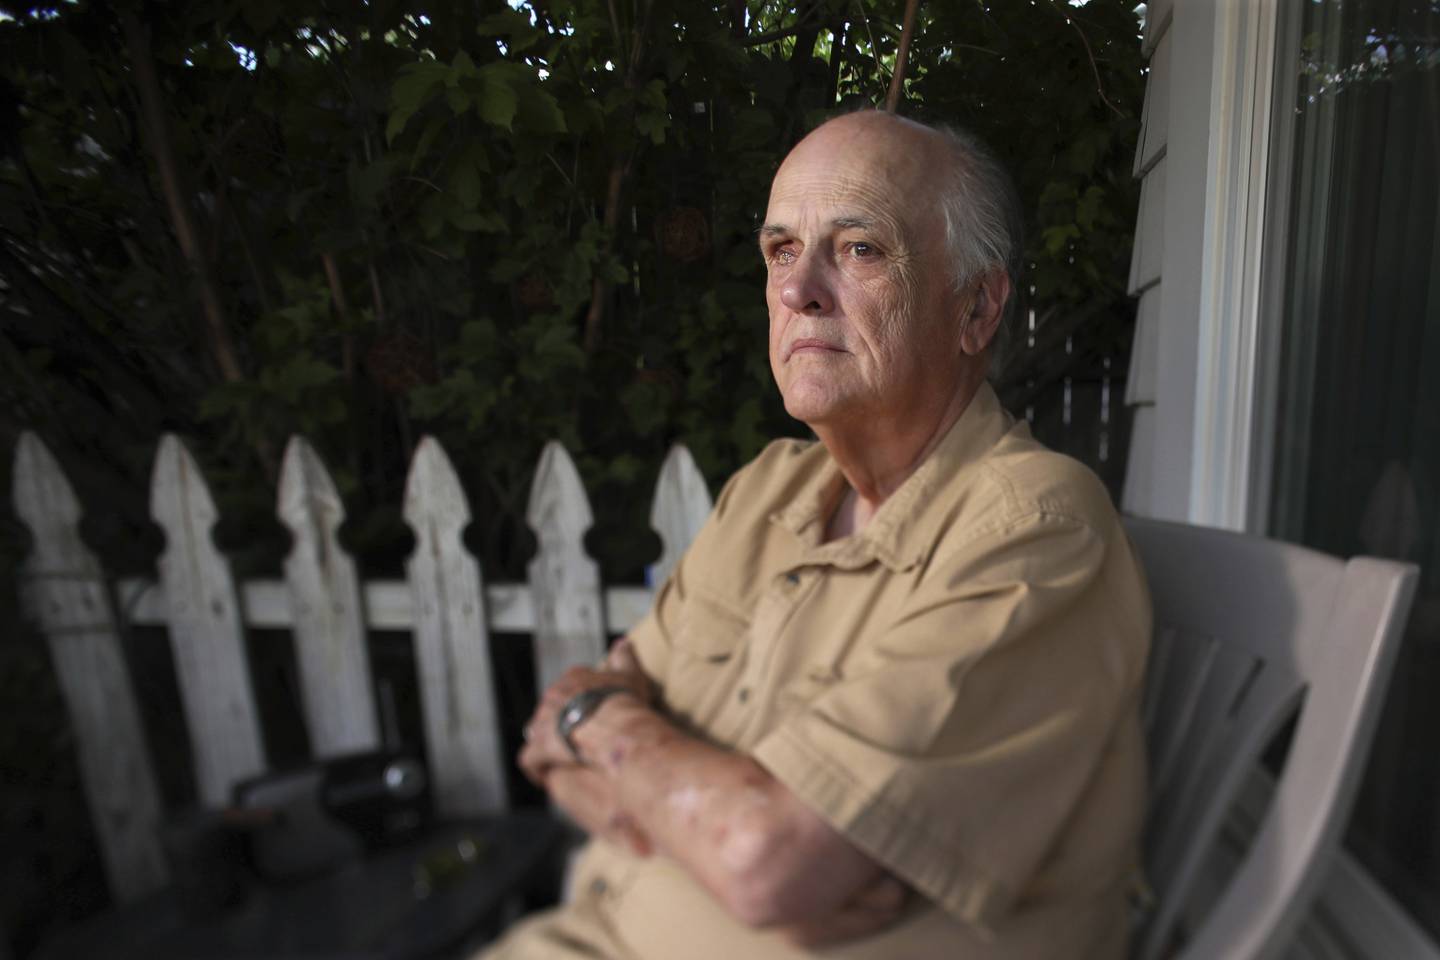 Former Chicago police Detective Jimmy Gildea, shown at his Chicago home in July, said of Roger Arnold: “He just struck me as being real resentful of his lot in life."